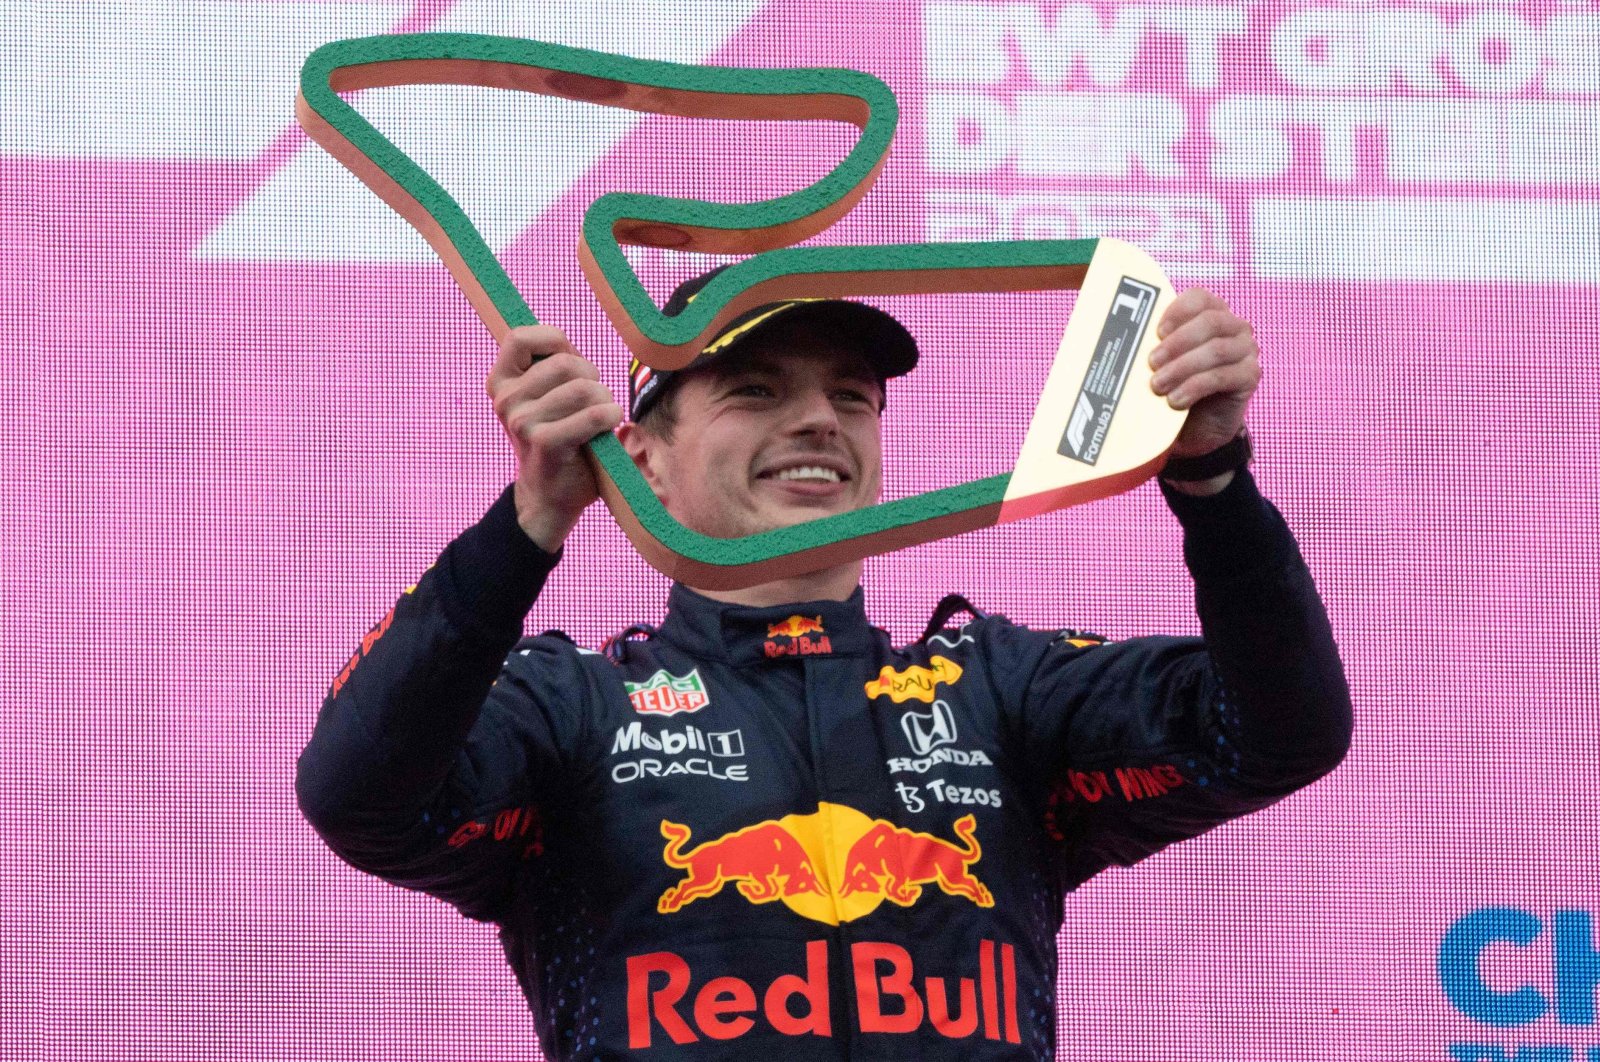 Red Bull's Dutch driver Max Verstappen holds his trophy as he celebrates winning the Formula One Styrian Grand Prix at the Red Bull Ring race track, Spielberg, Austria, June 27, 2021. (AFP Photo)